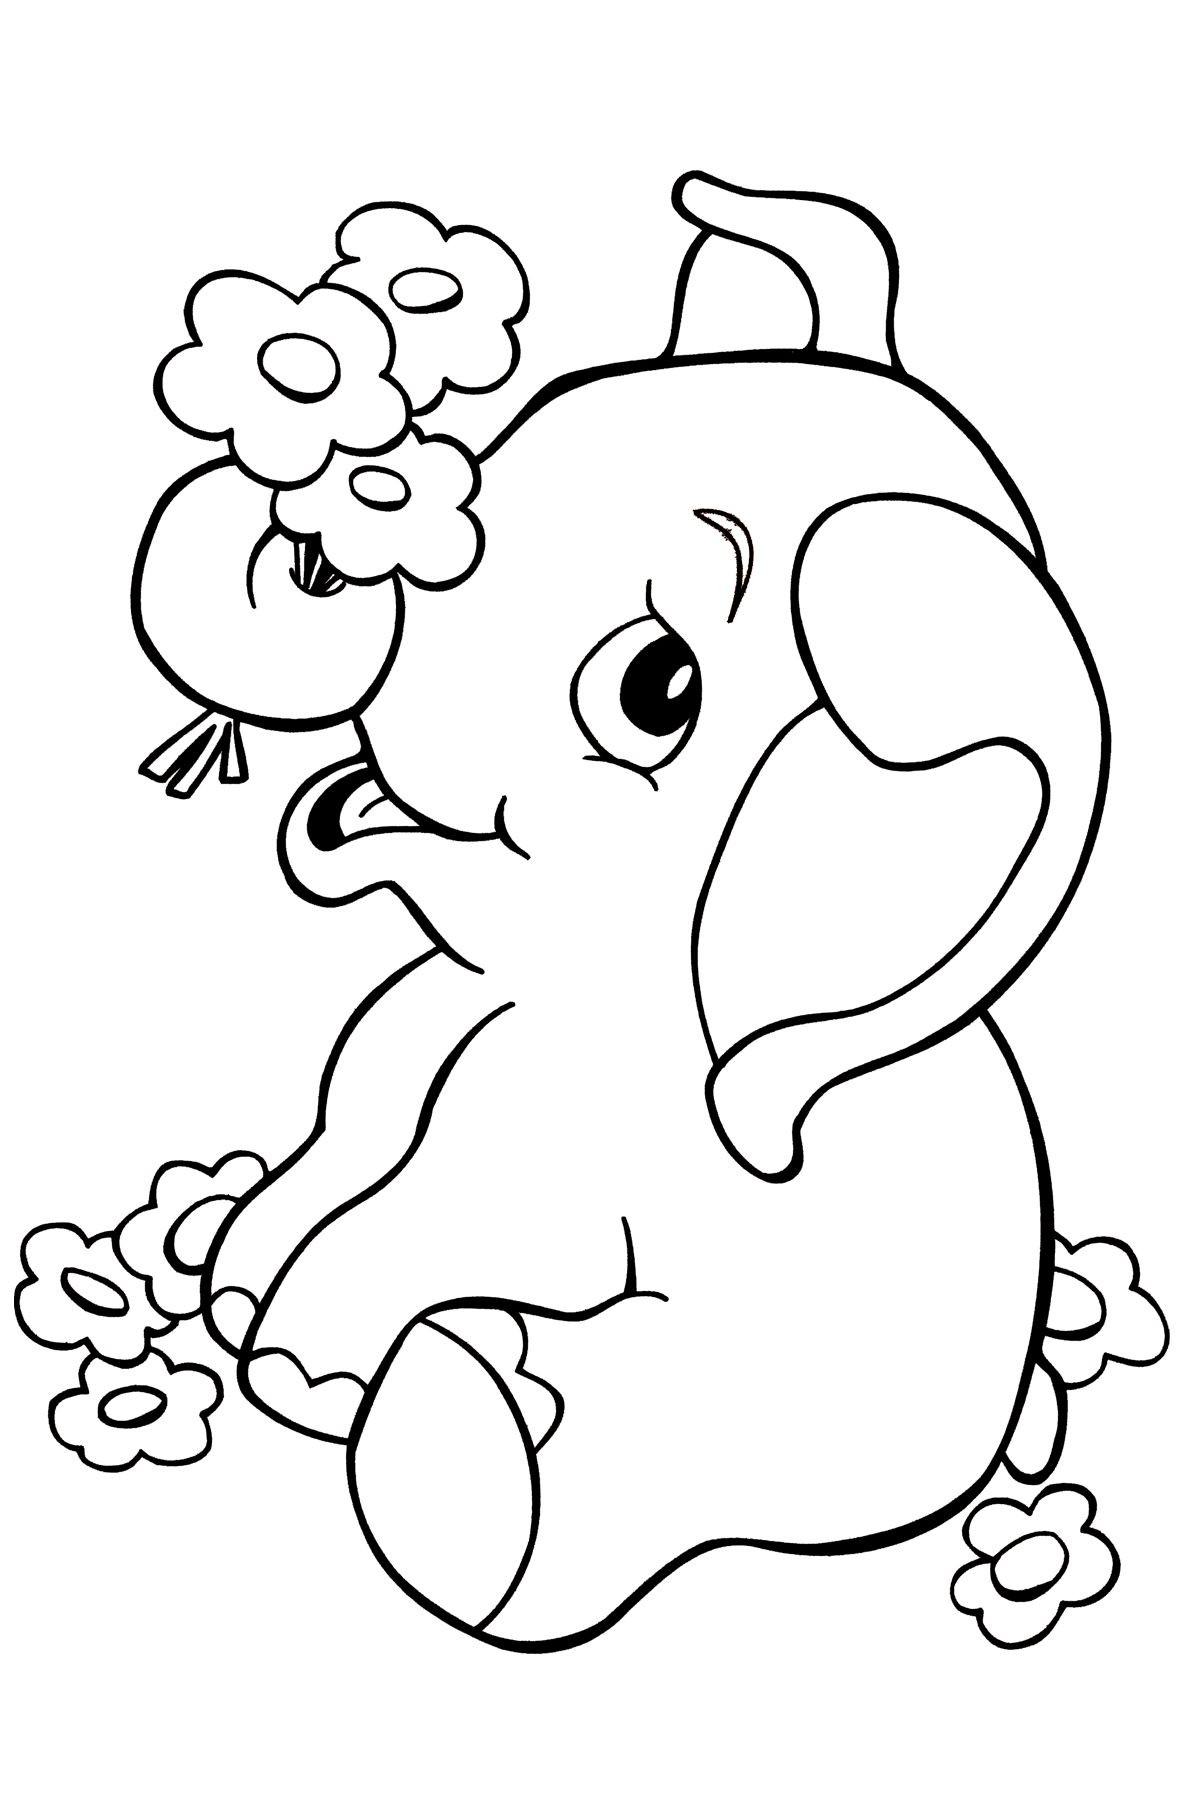 Coloring Sheets For Children
 Jungle Coloring Pages Best Coloring Pages For Kids